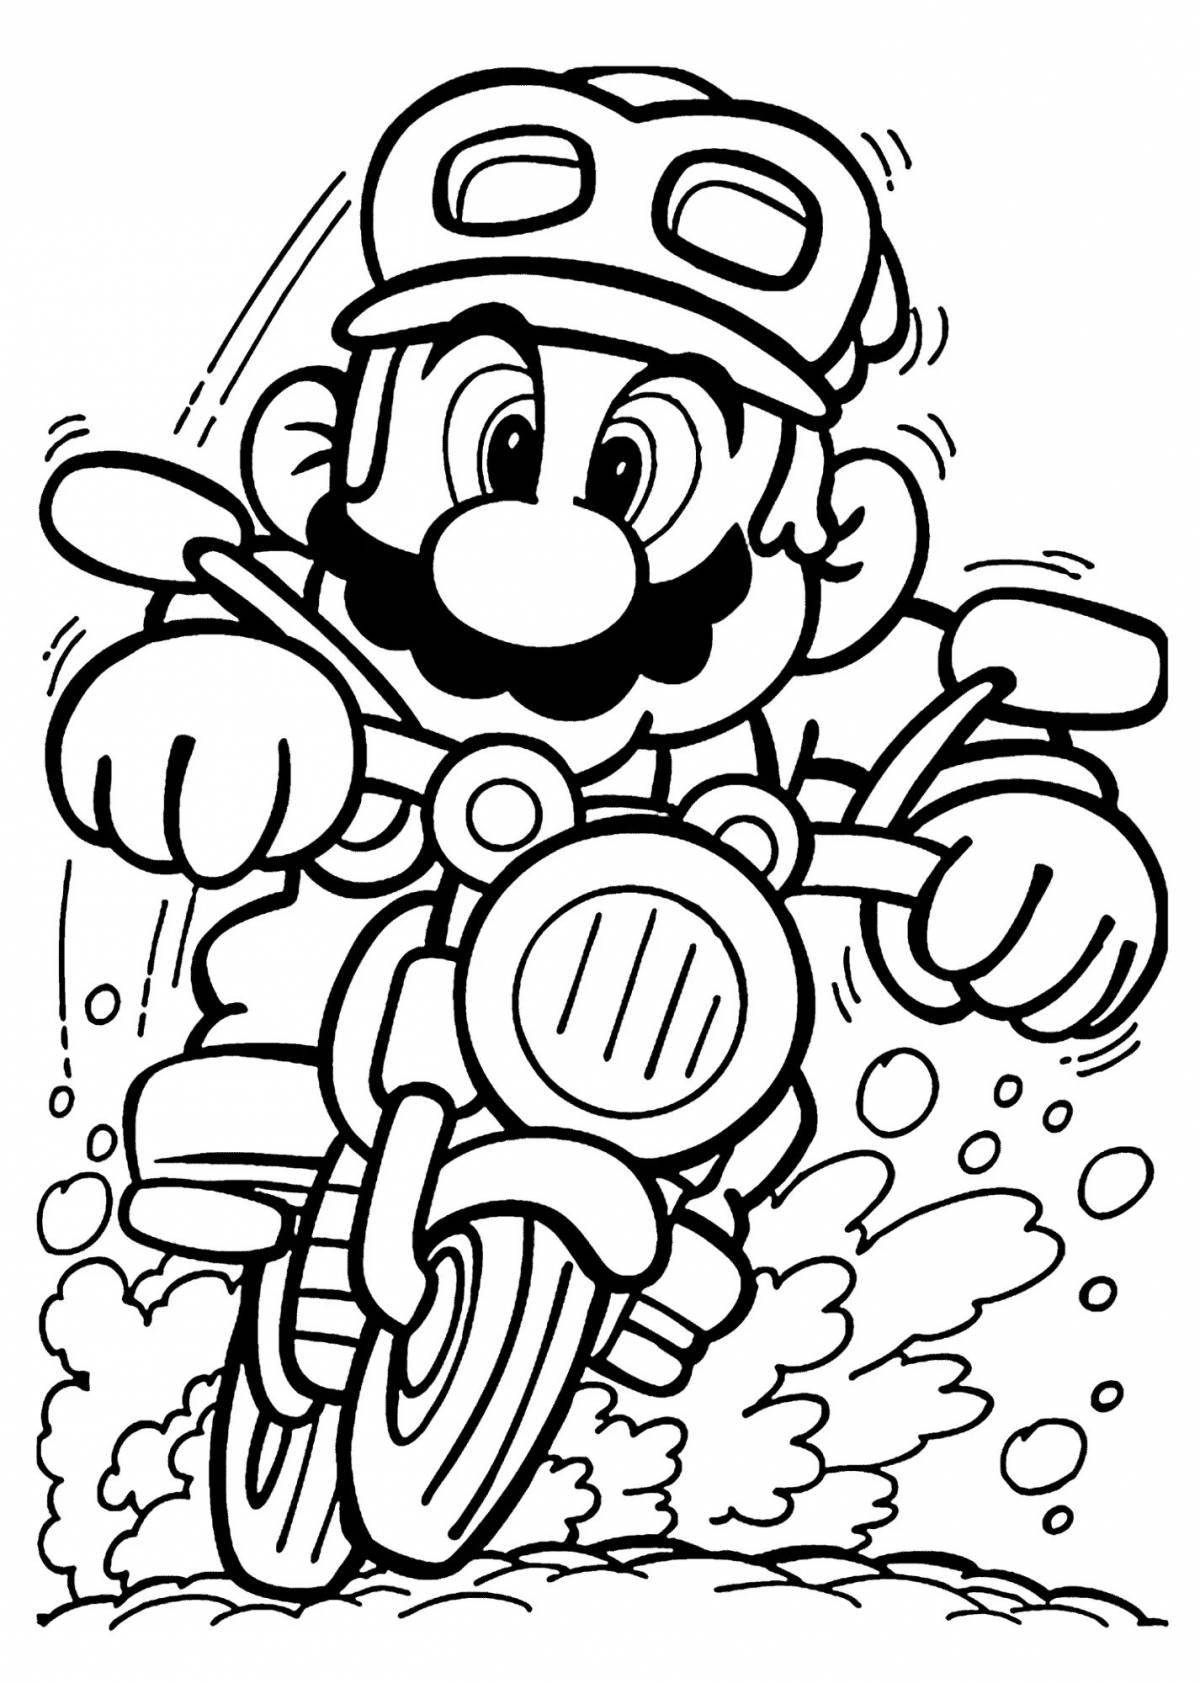 Color explosion mario by numbers coloring book